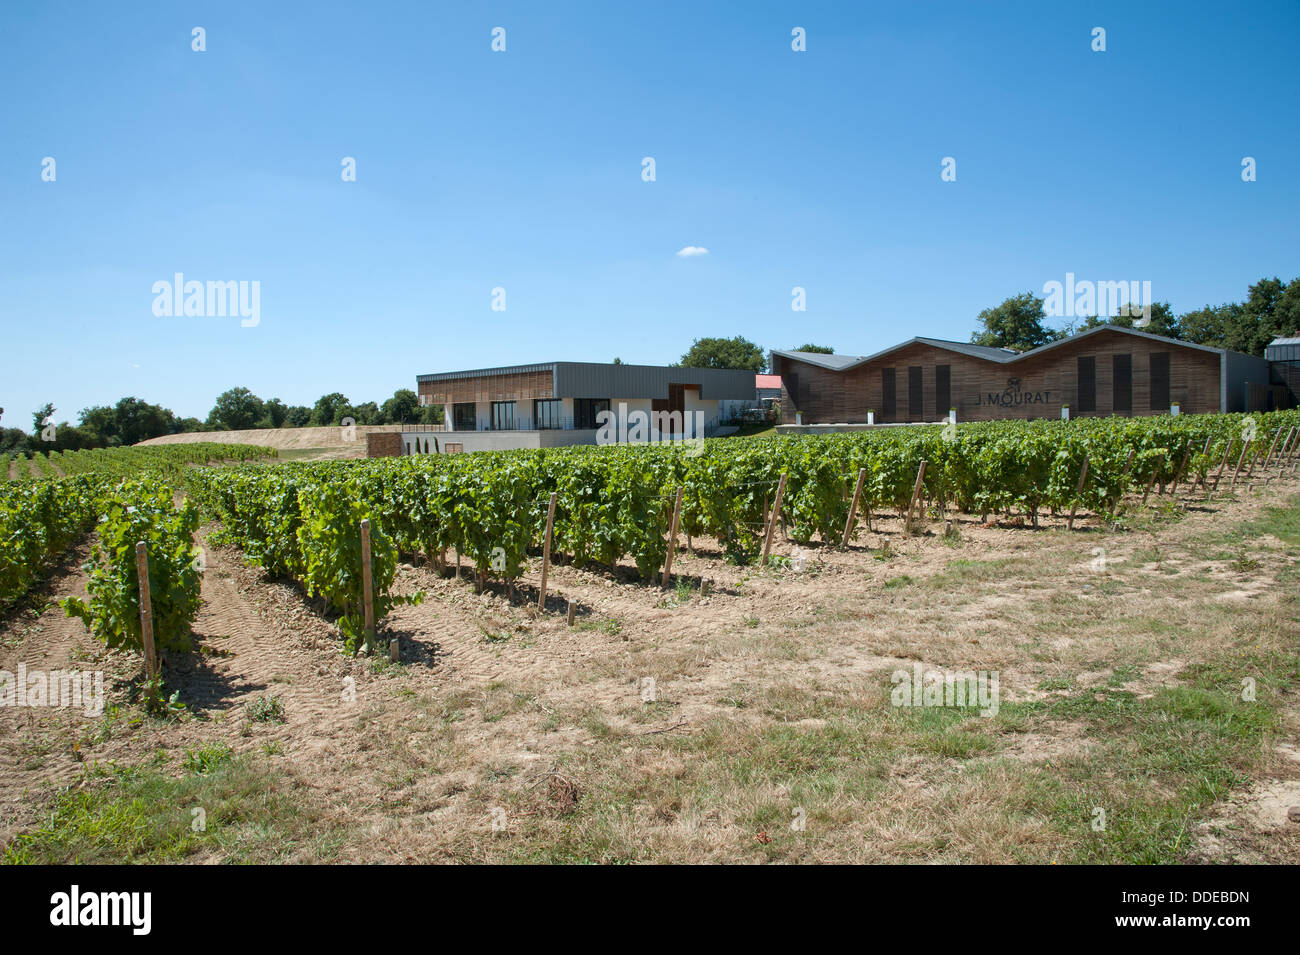 J Mourat winery and vines at Mareuil sur Lay in the Vendee region France Stock Photo